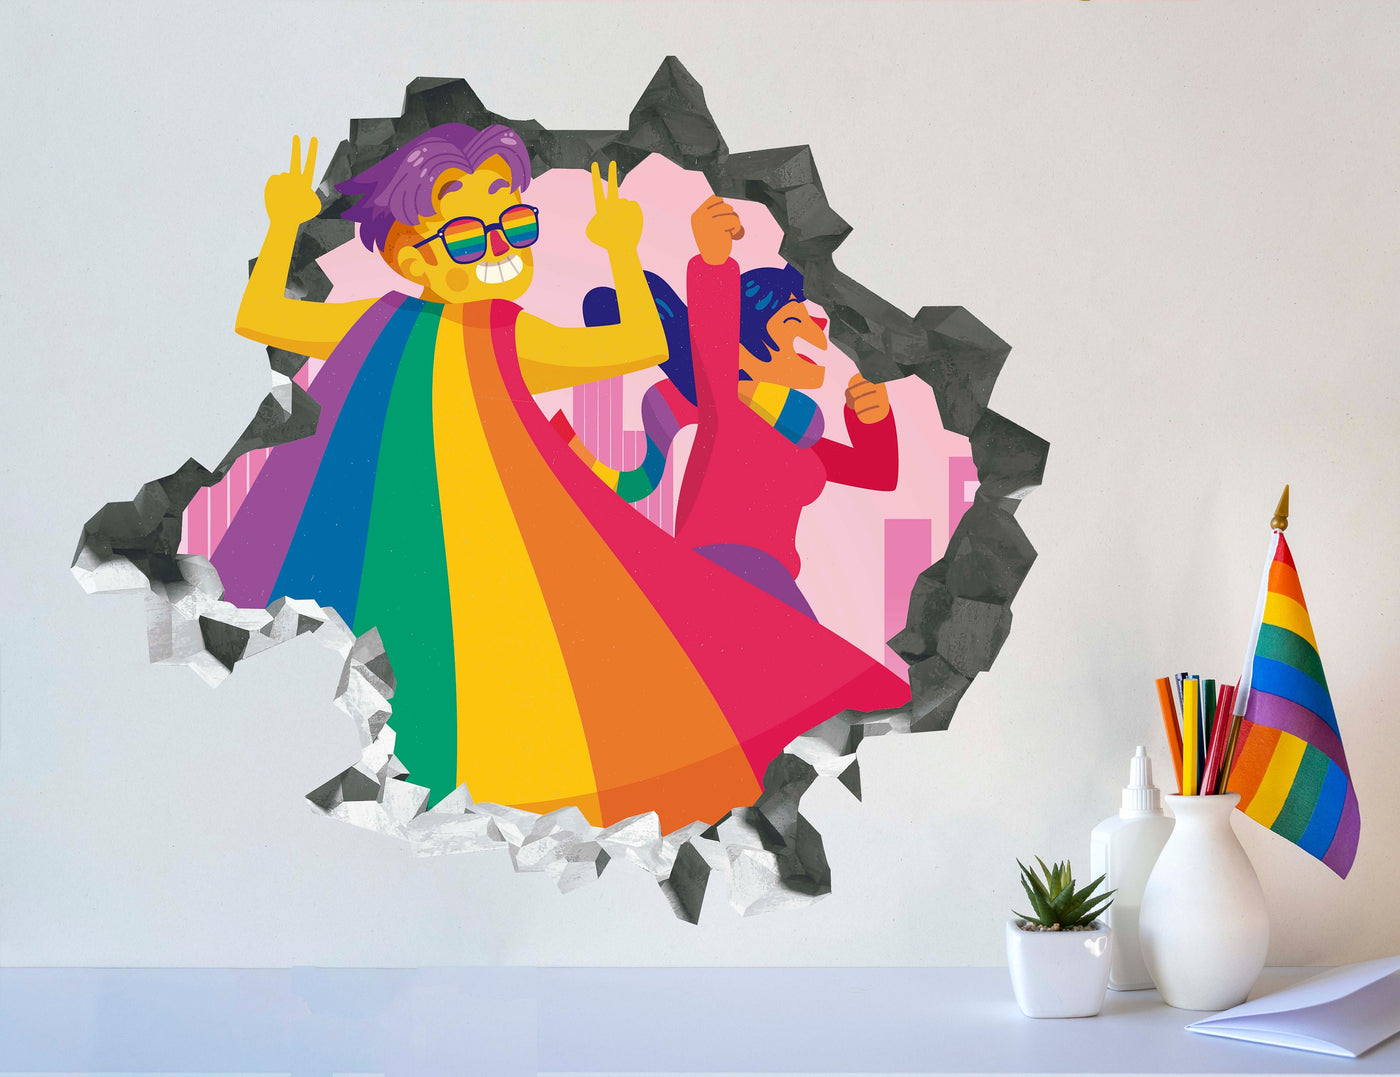 Celebration of Pride March Wall Decal - LGBTQ+ Parade Wall Decor - March of Love Wallhole Decal - Stand With Pride March Decal - Equality